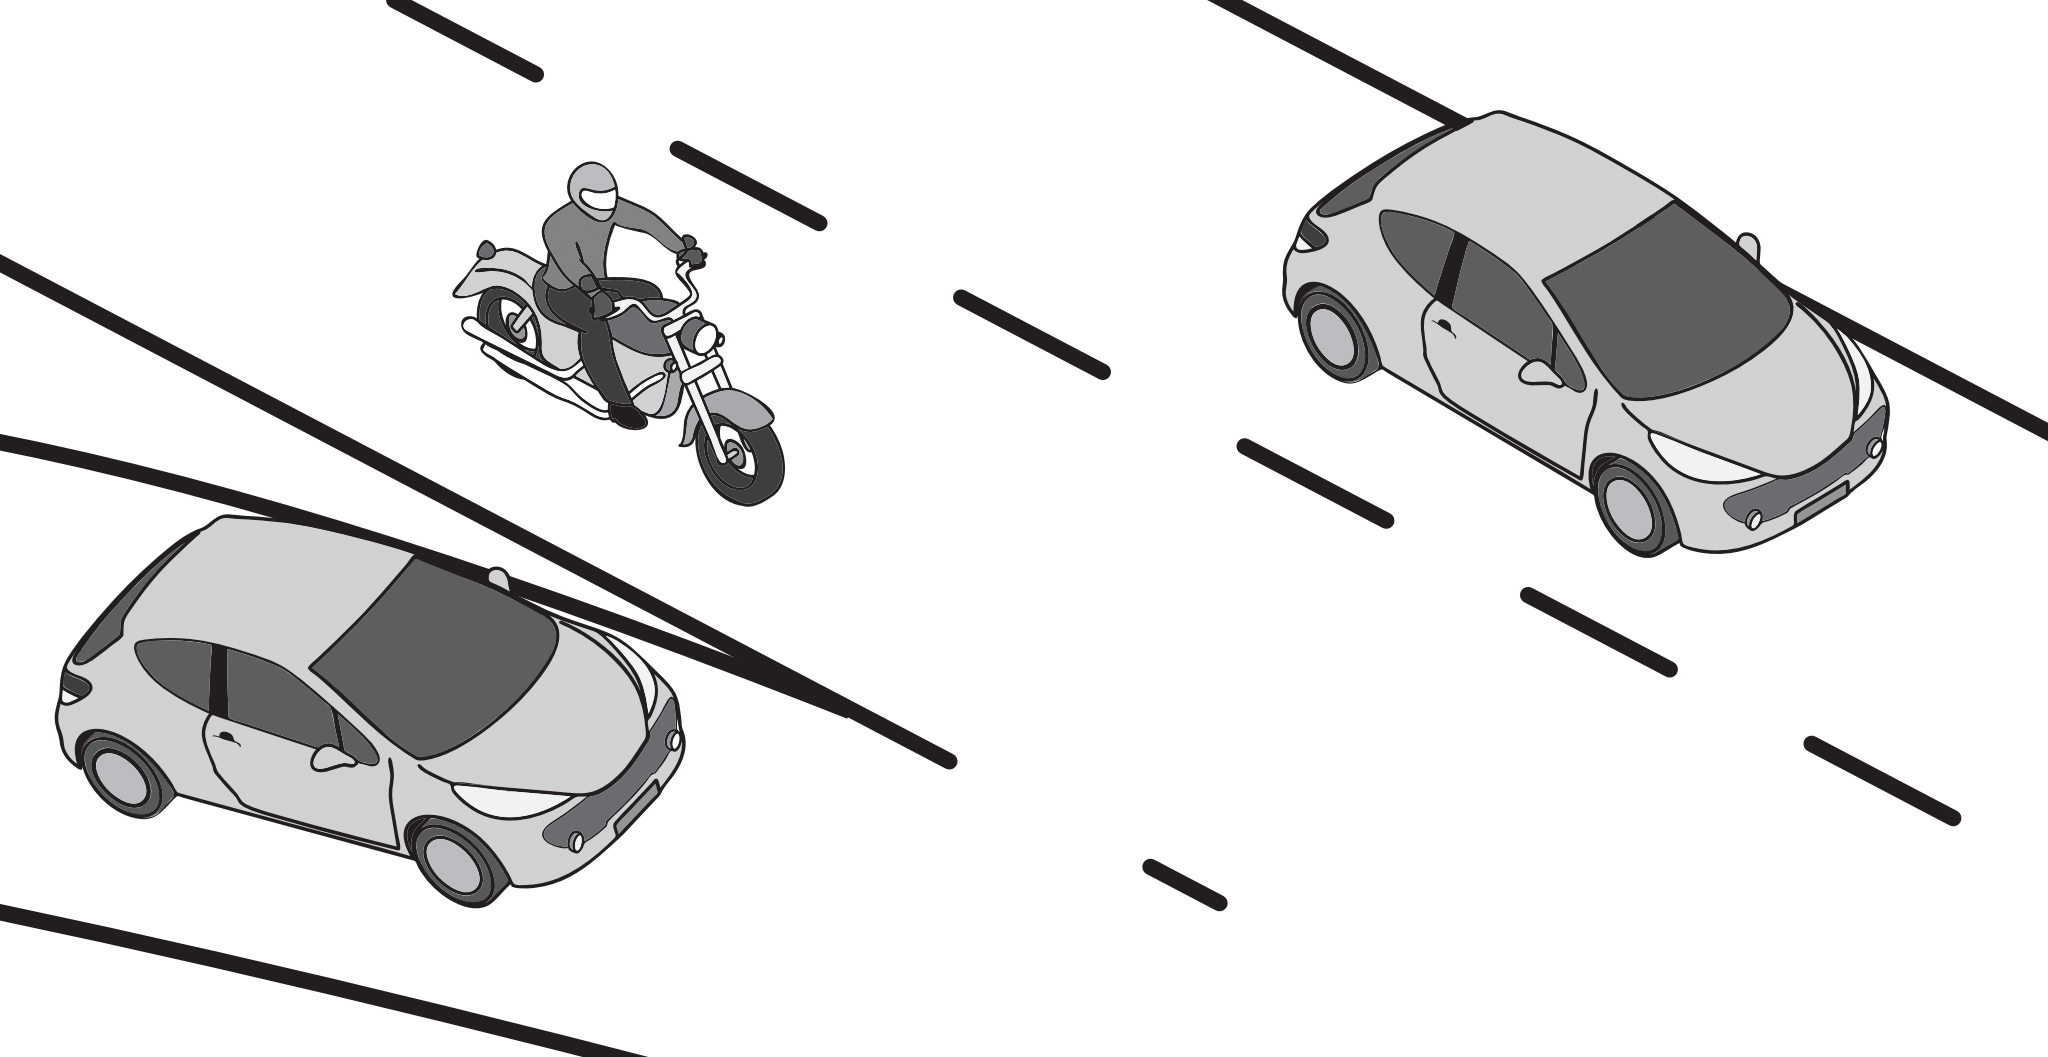 image of lane sharing on a motorcycle